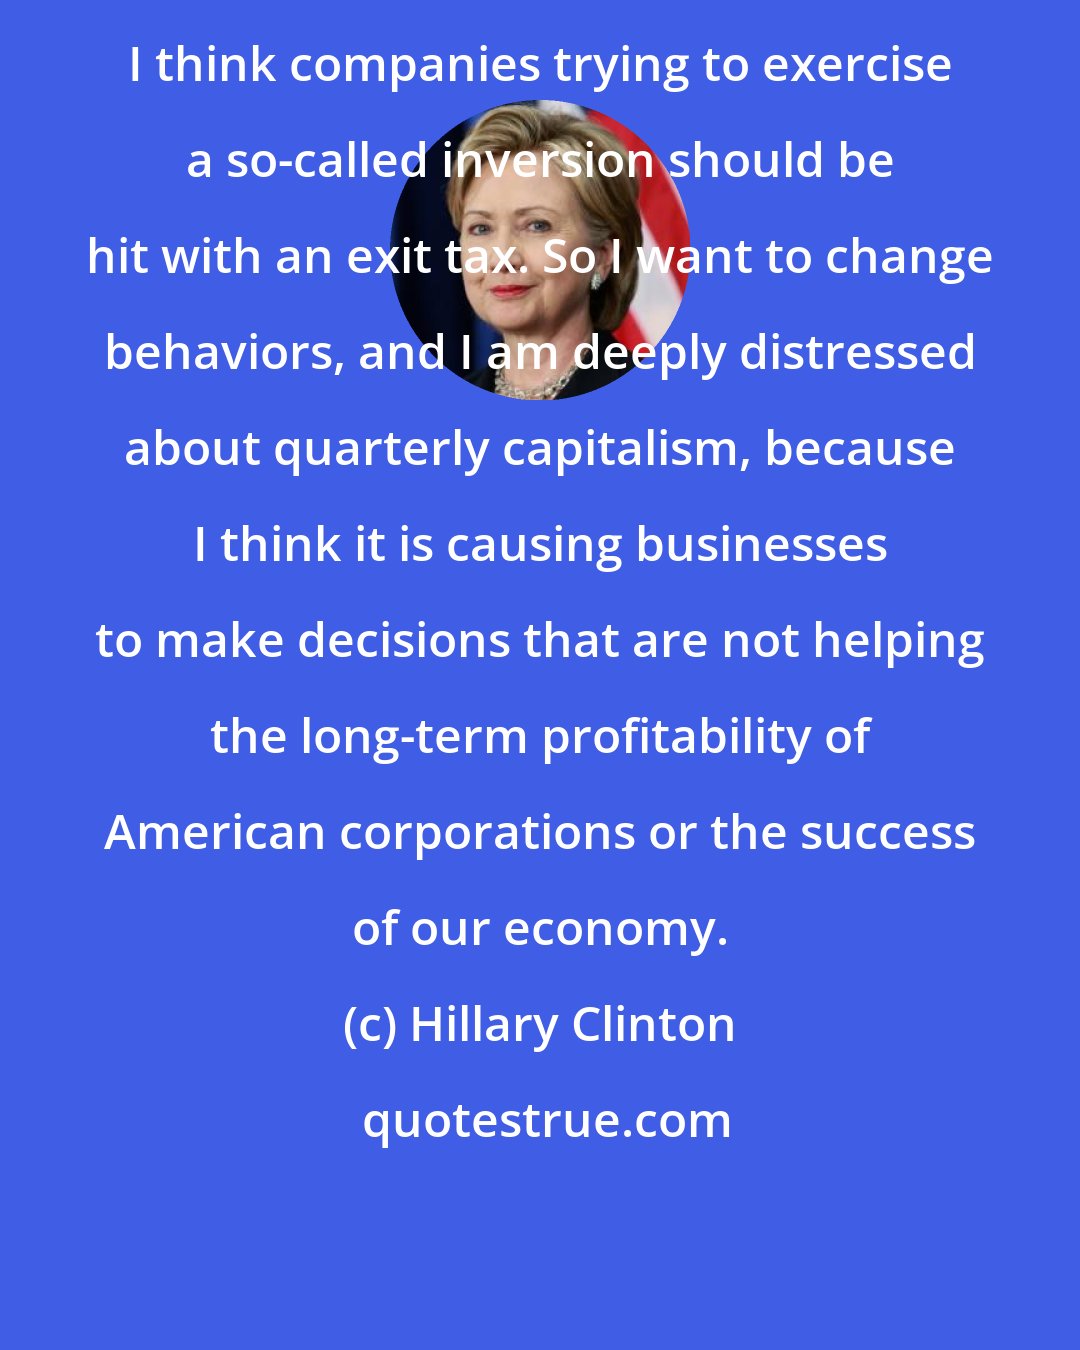 Hillary Clinton: I think companies trying to exercise a so-called inversion should be hit with an exit tax. So I want to change behaviors, and I am deeply distressed about quarterly capitalism, because I think it is causing businesses to make decisions that are not helping the long-term profitability of American corporations or the success of our economy.